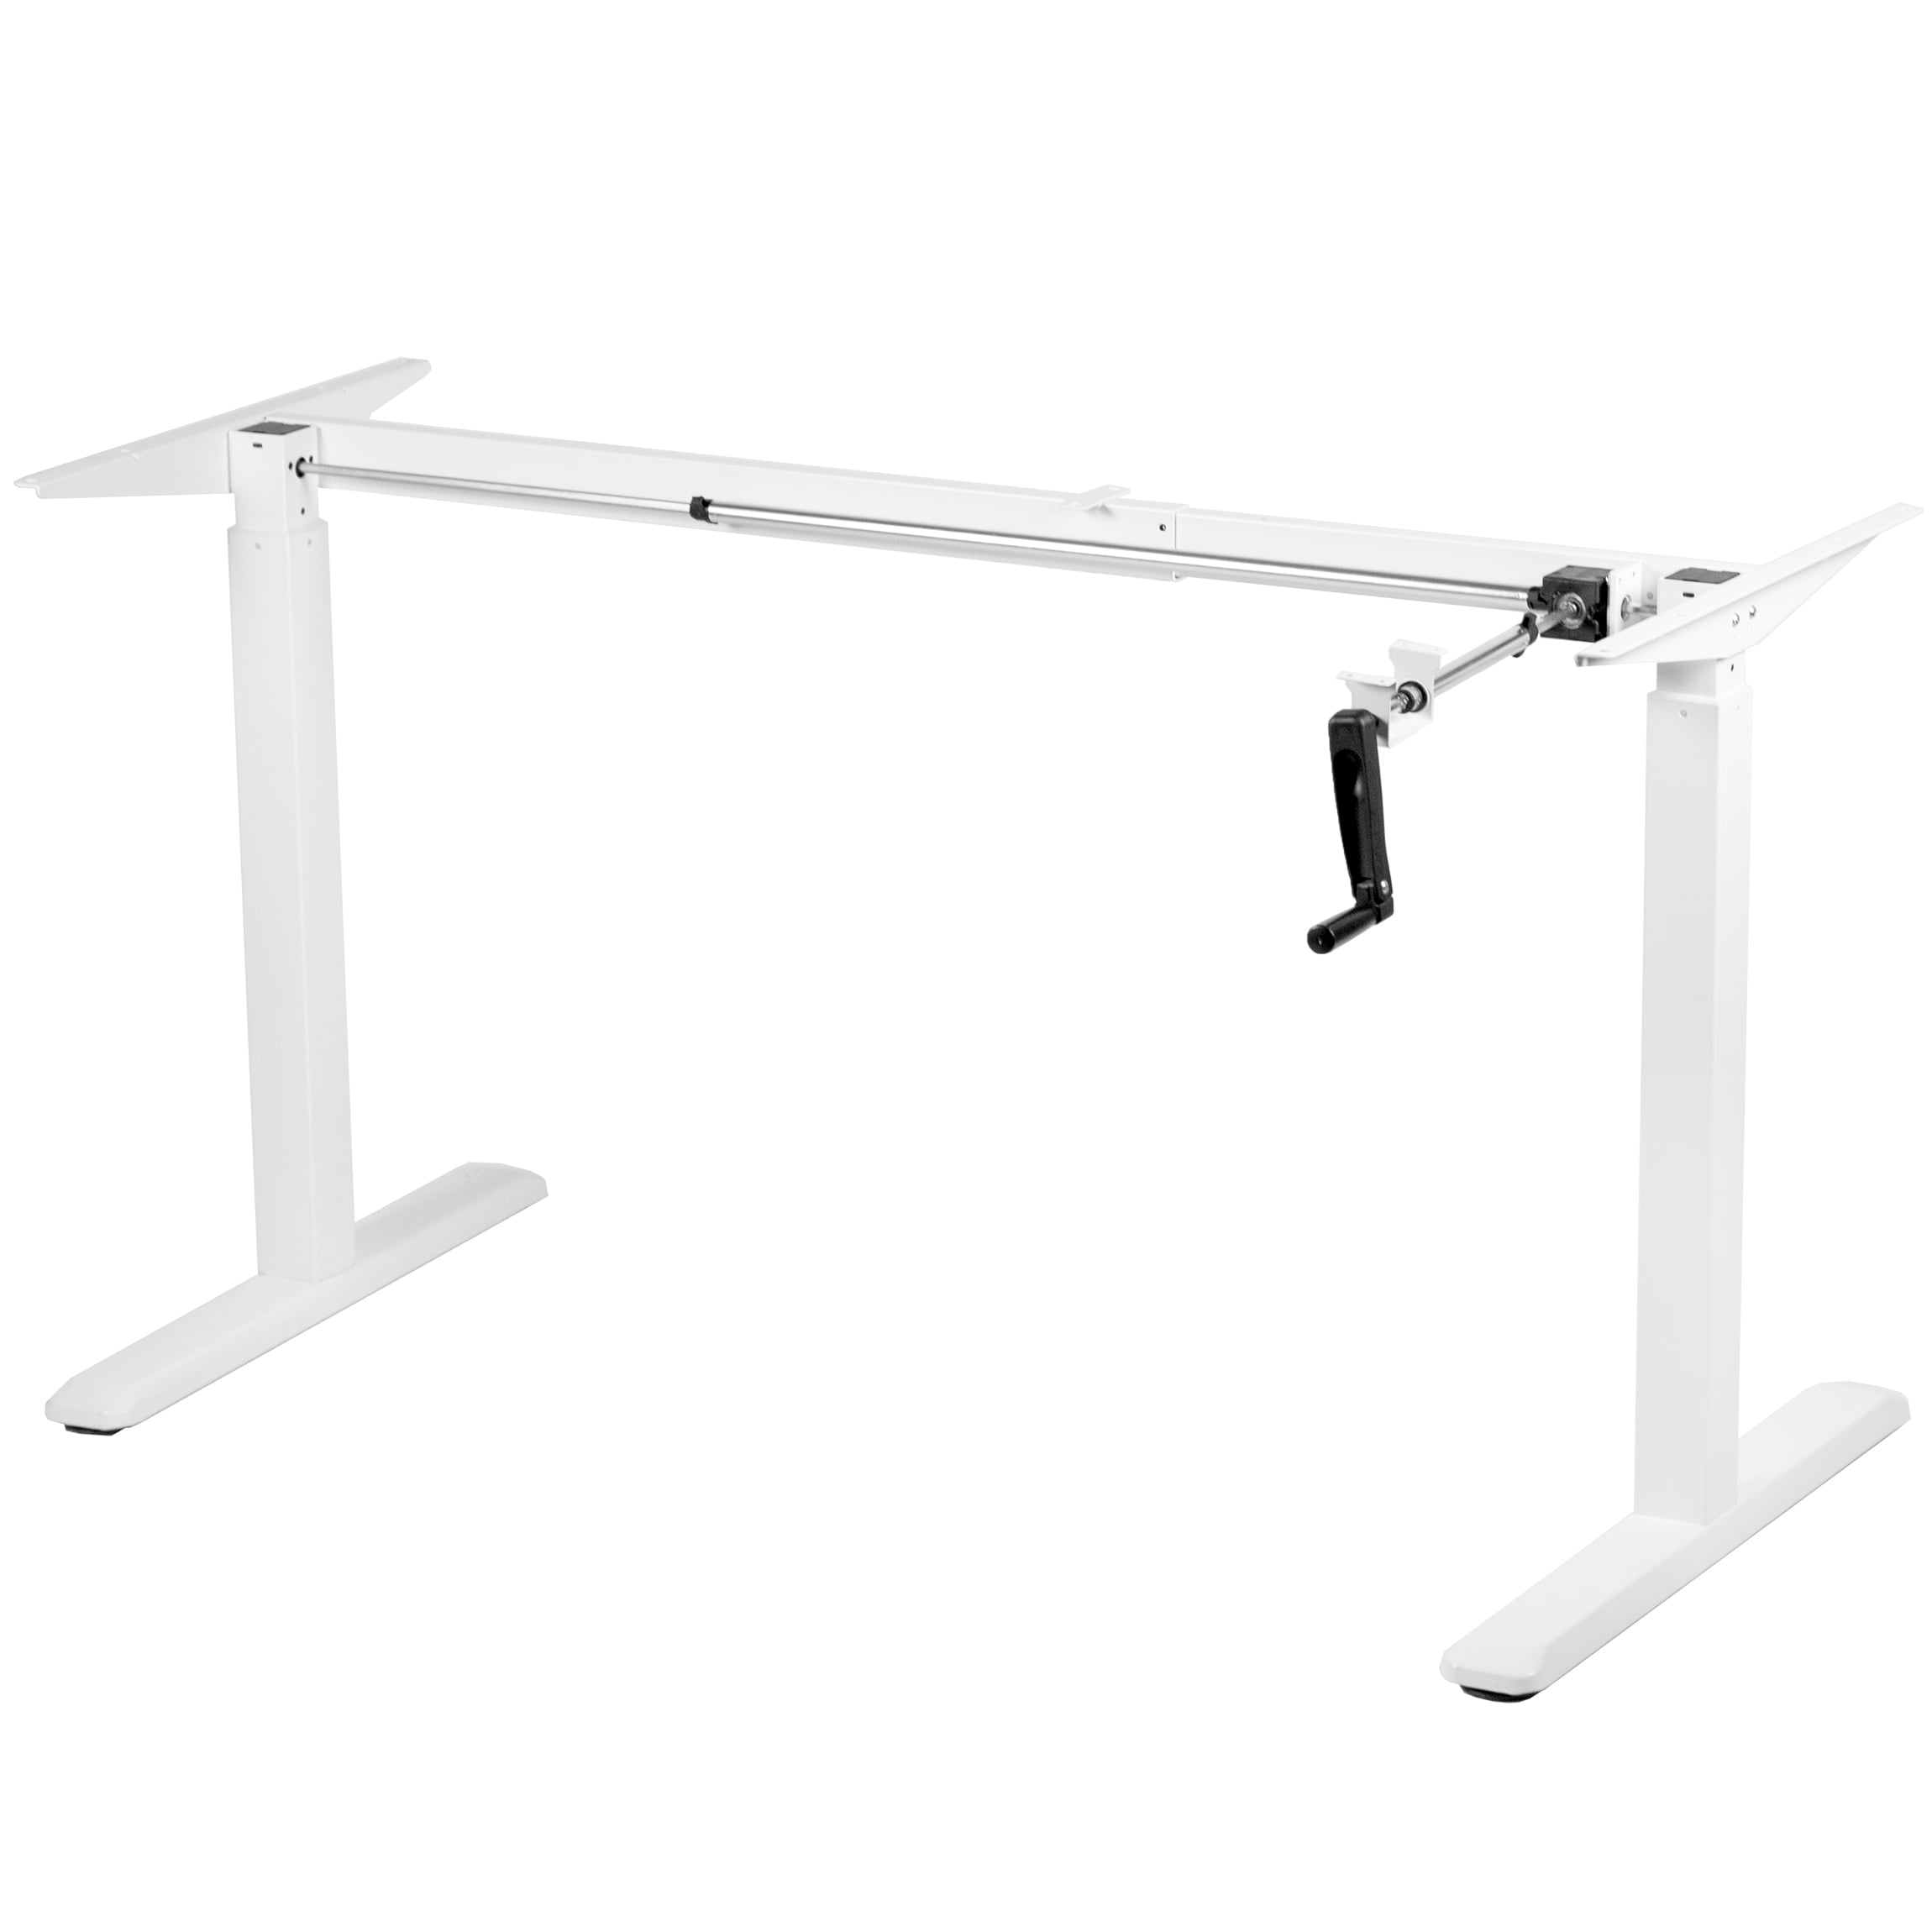 Ergonomic Standing Height Adjustable Base with Crank Handle DESK-M051CW VIVO Compact Hand Crank Stand Up Desk Frame for 33 to 52 inch Table Tops White 